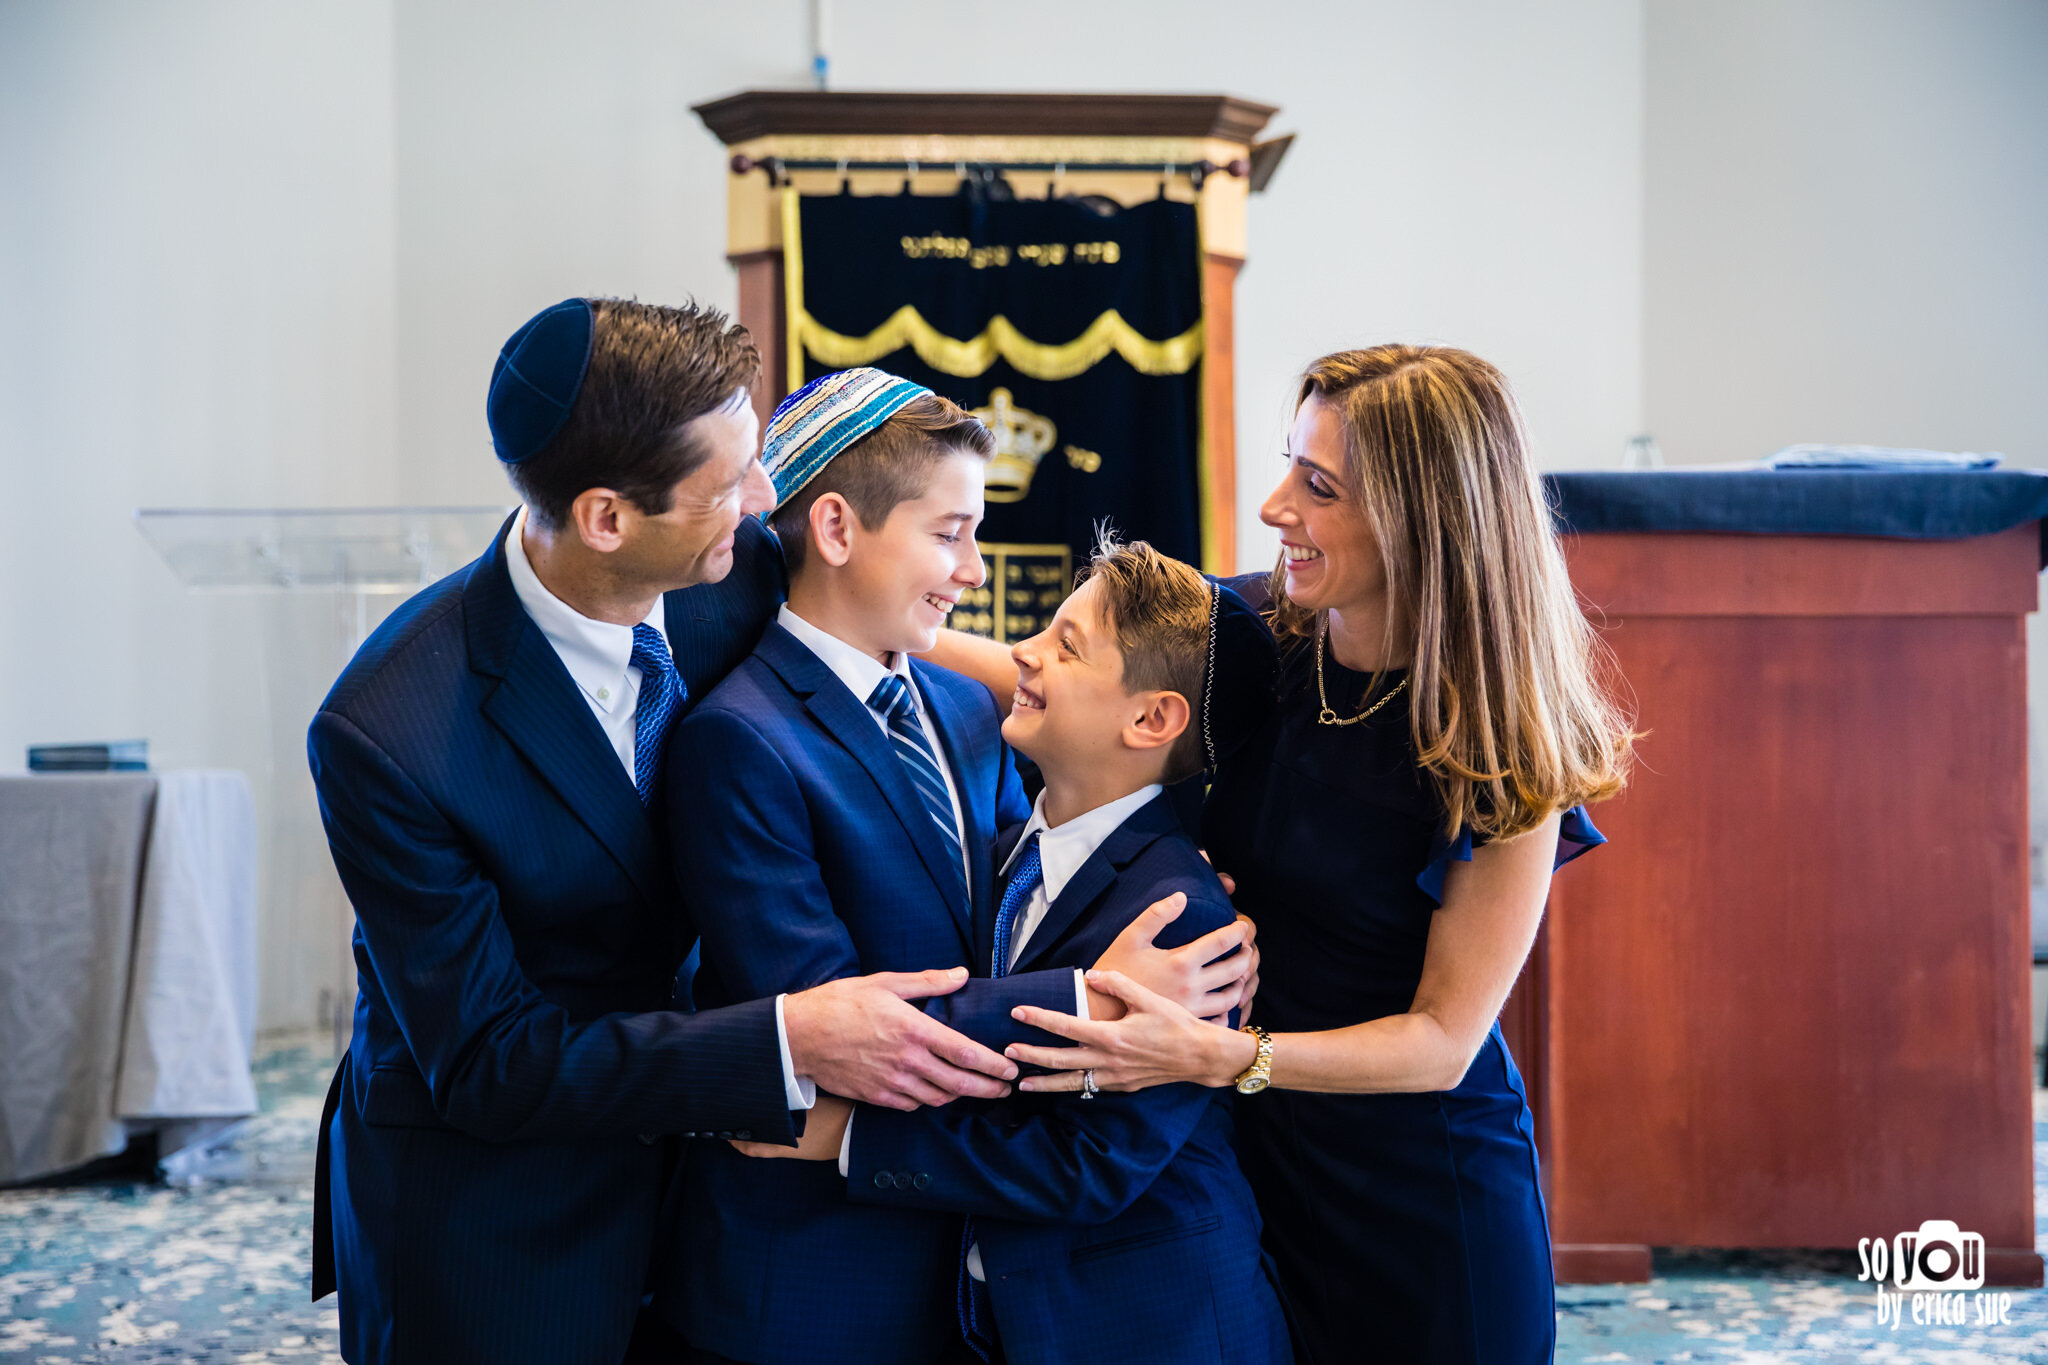 1-so-you-by-erica-sue-chabad-parkland-bar-mitzvah-photographer-2214.JPG